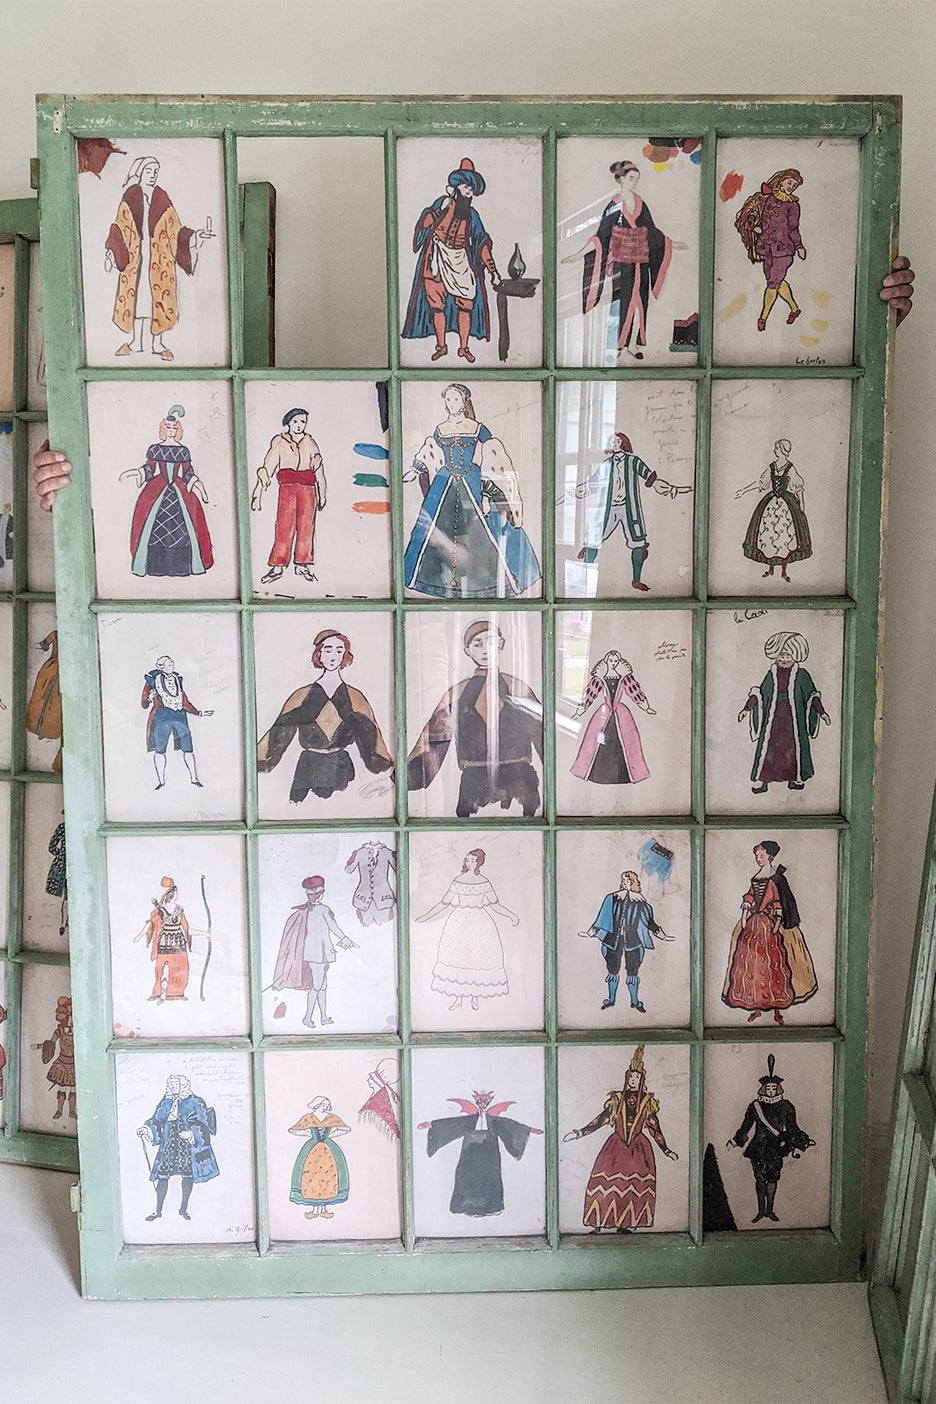 drawings of characters behind a window pane